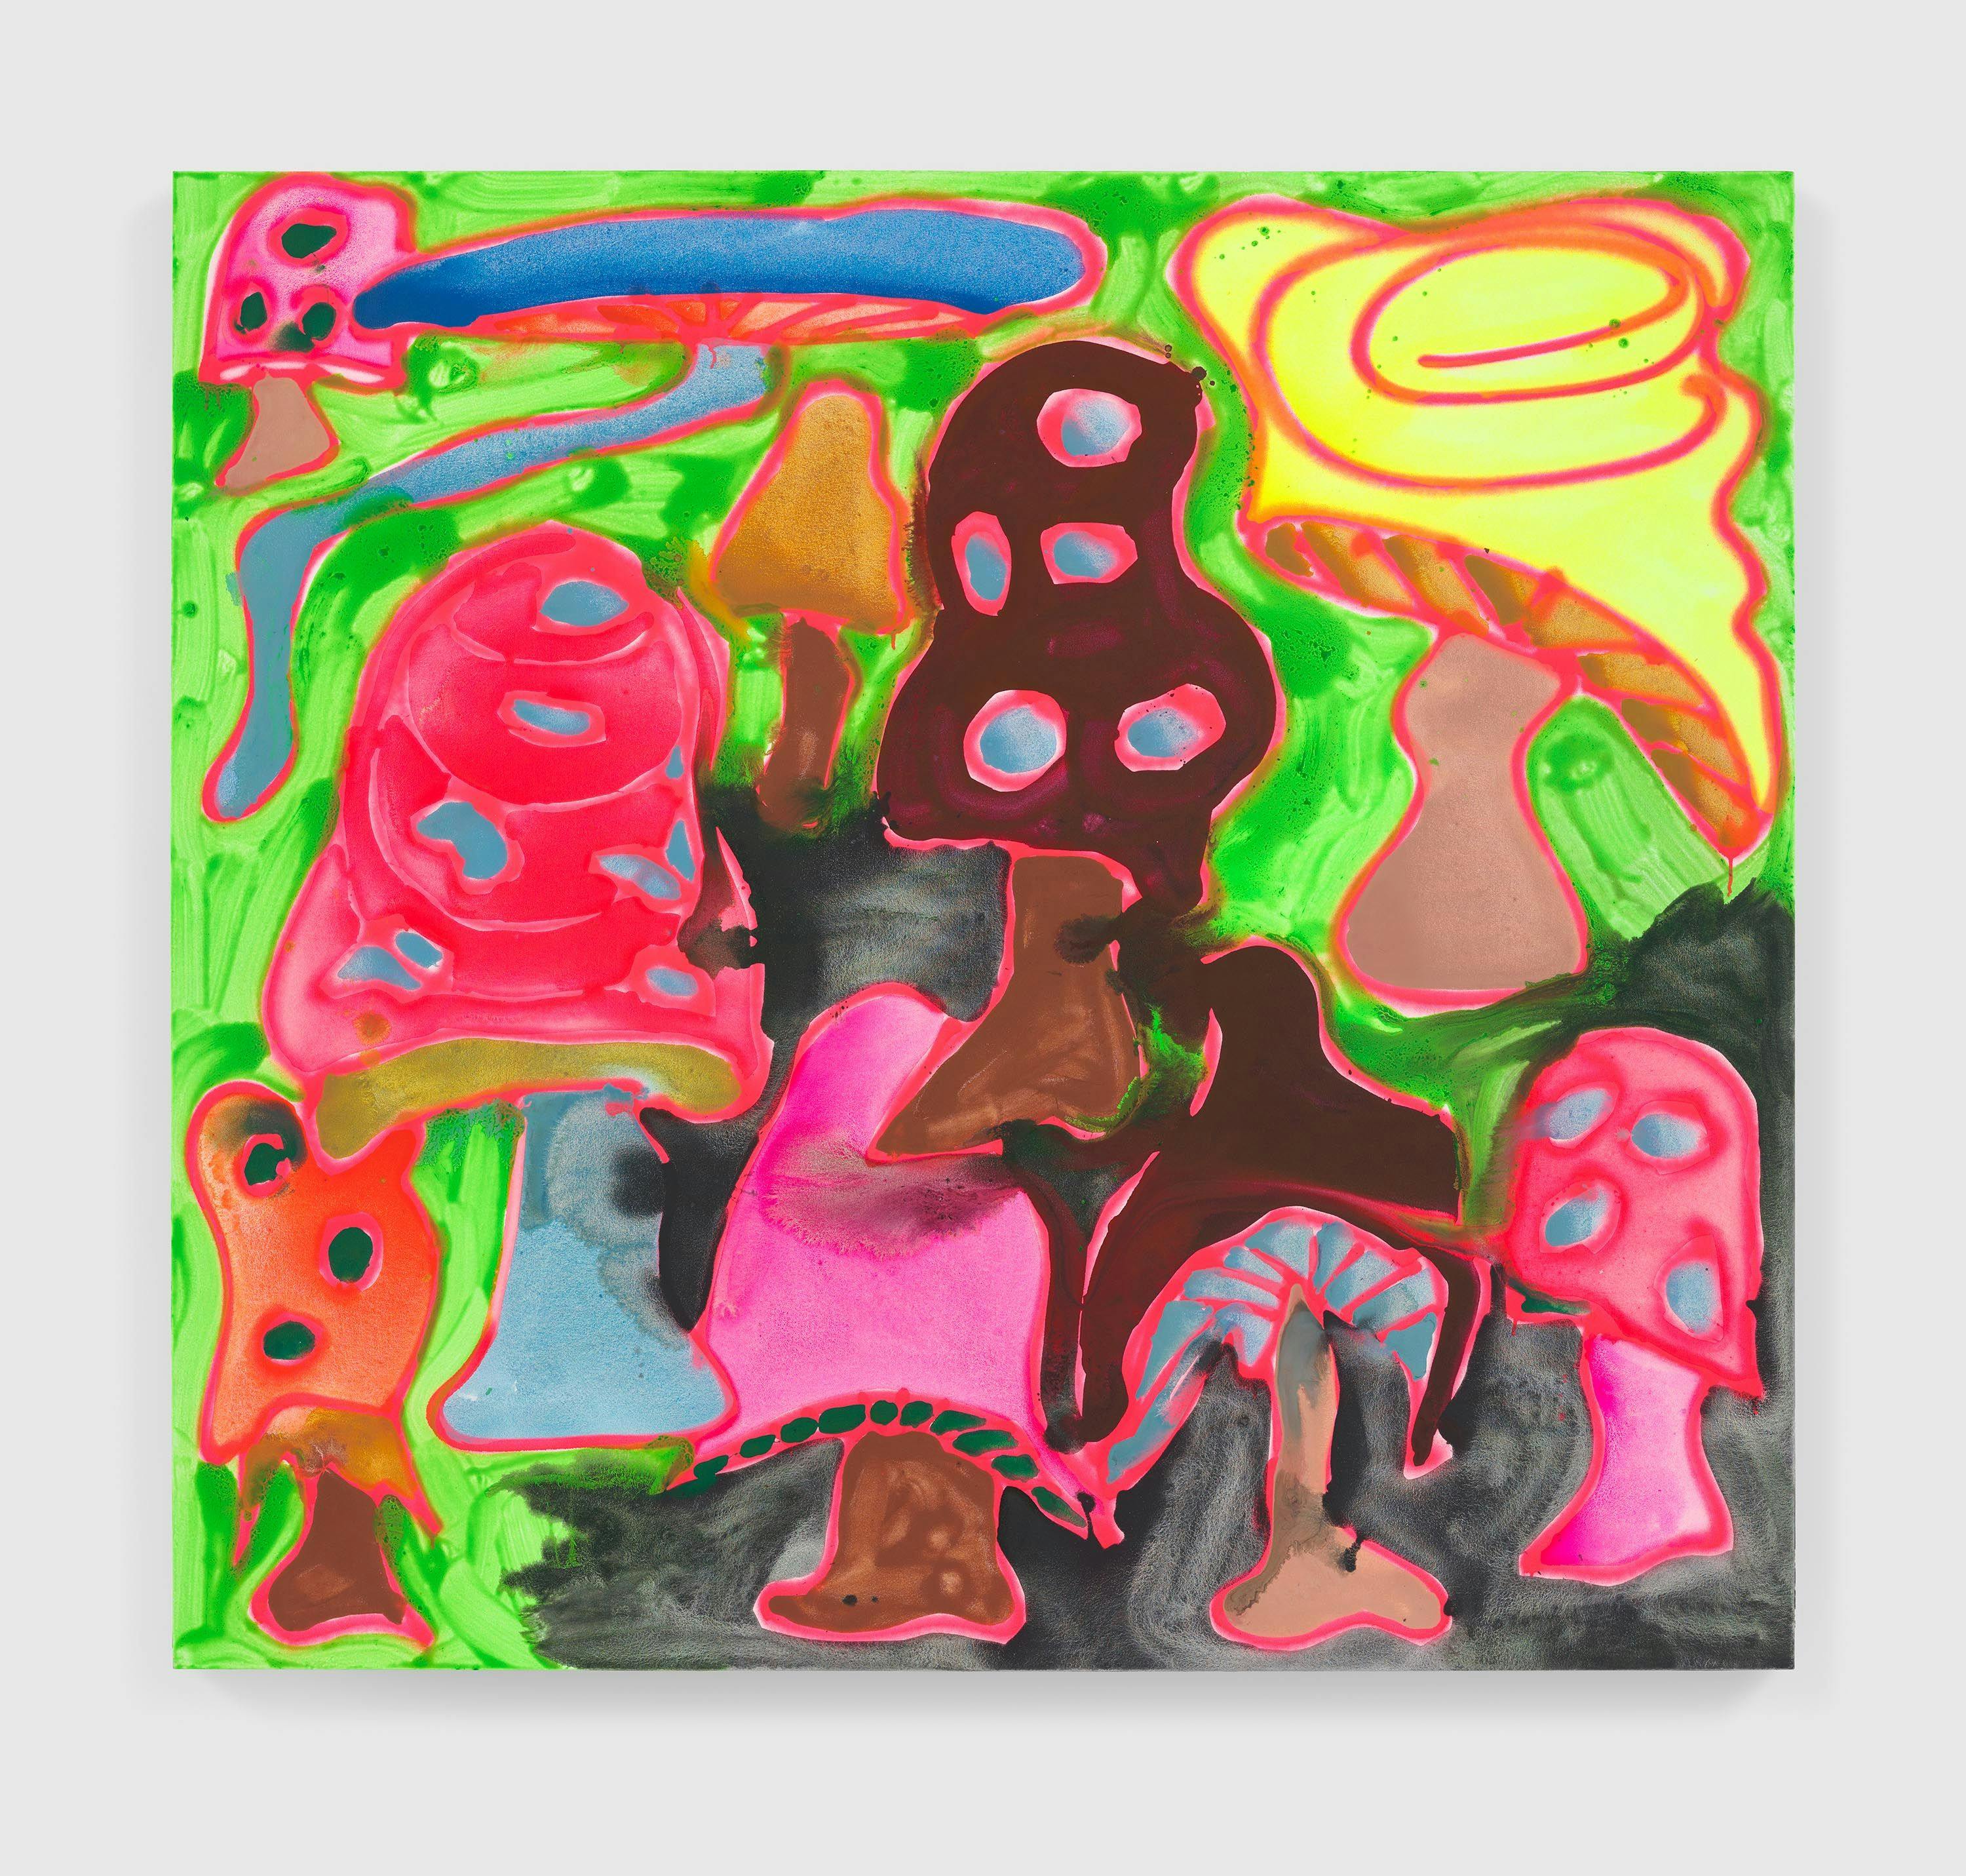 An acrylic and spray paint on canvas artwork by Katherine Bernhardt, titled Diplo, dated 2022.